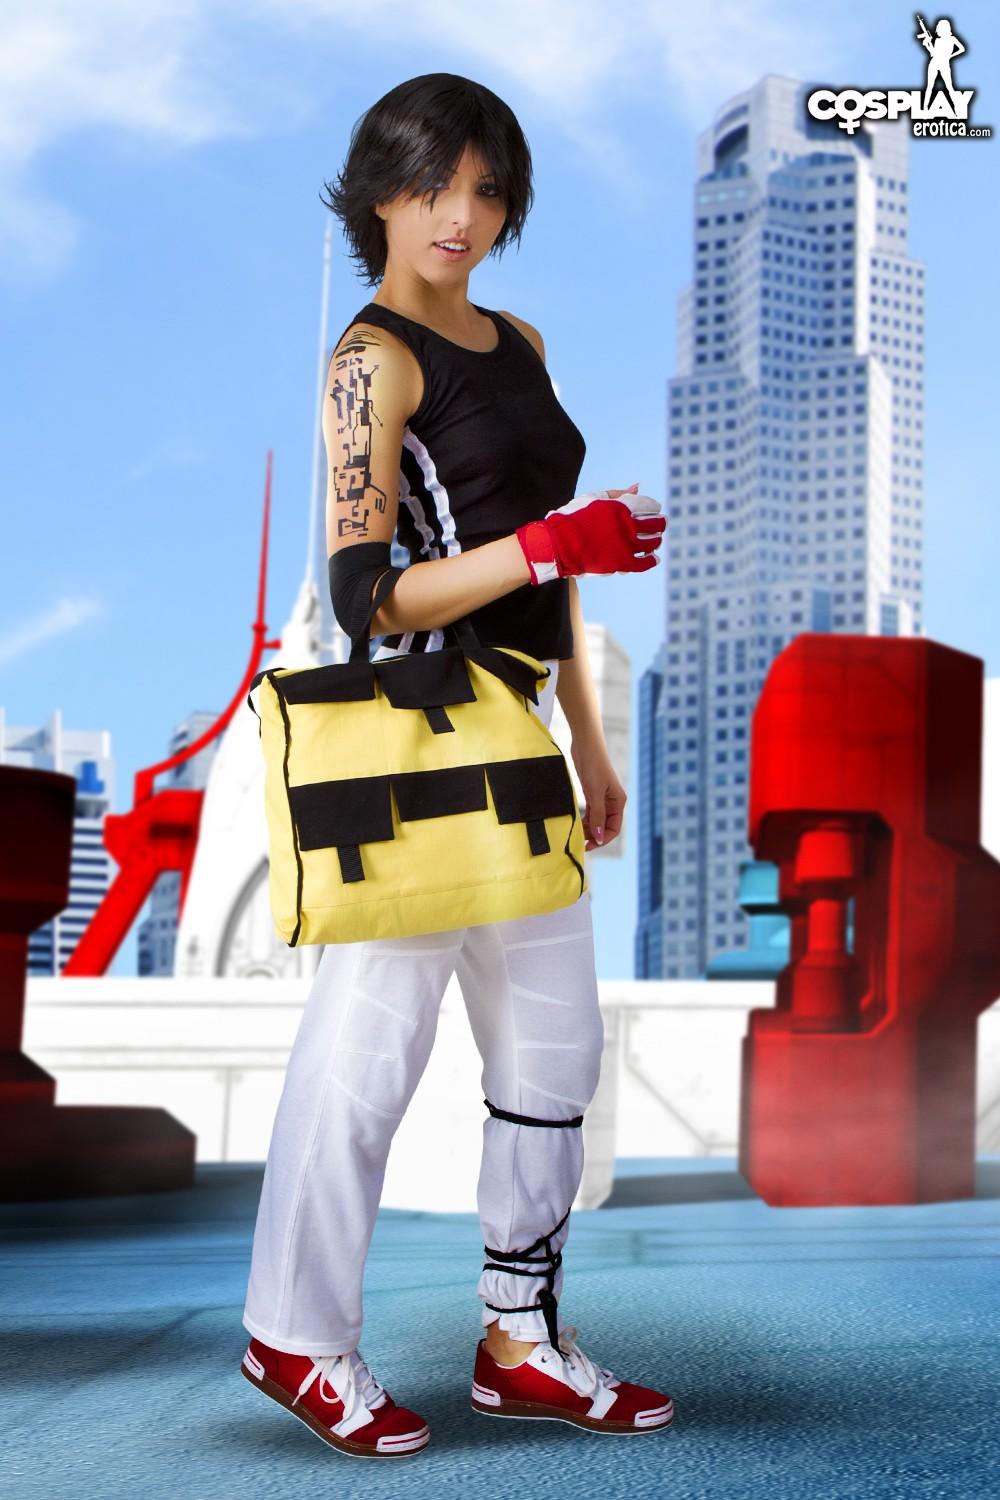 Sexy cosplay girl Anne poses as Faith from Mirror's Edge #53248345